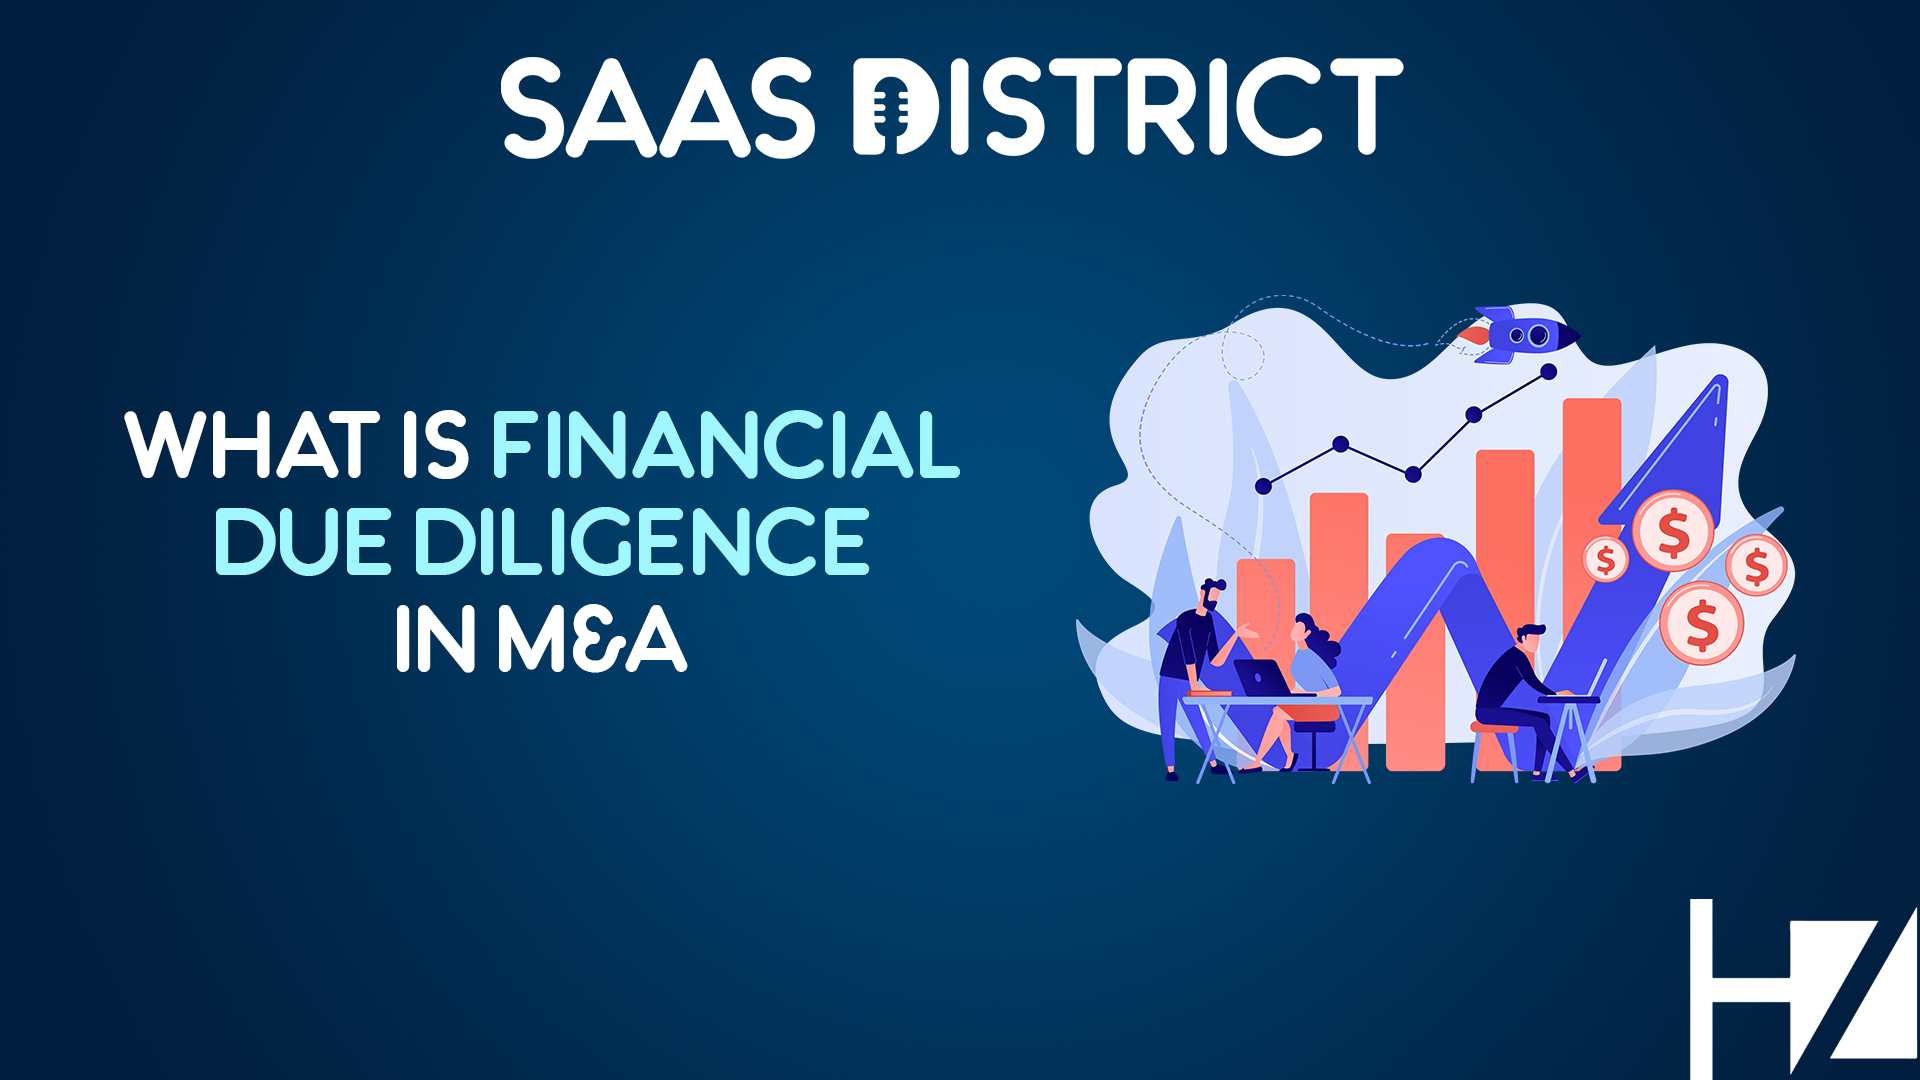 financial due diligence in M&A